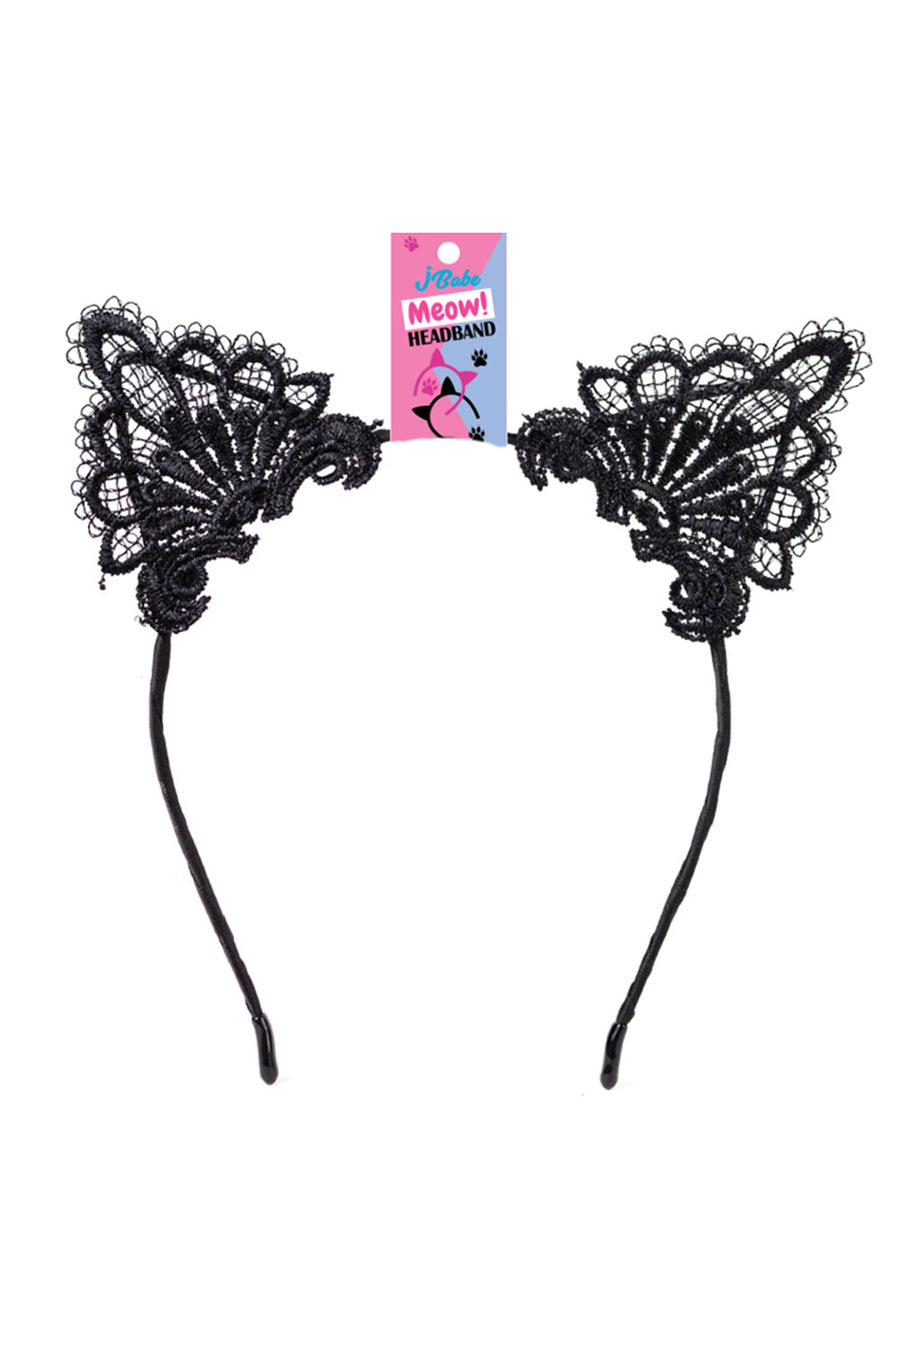 Meow! Lace Cat Ears Headbands Hair Accessories, Set of 2 - Vacay Land 